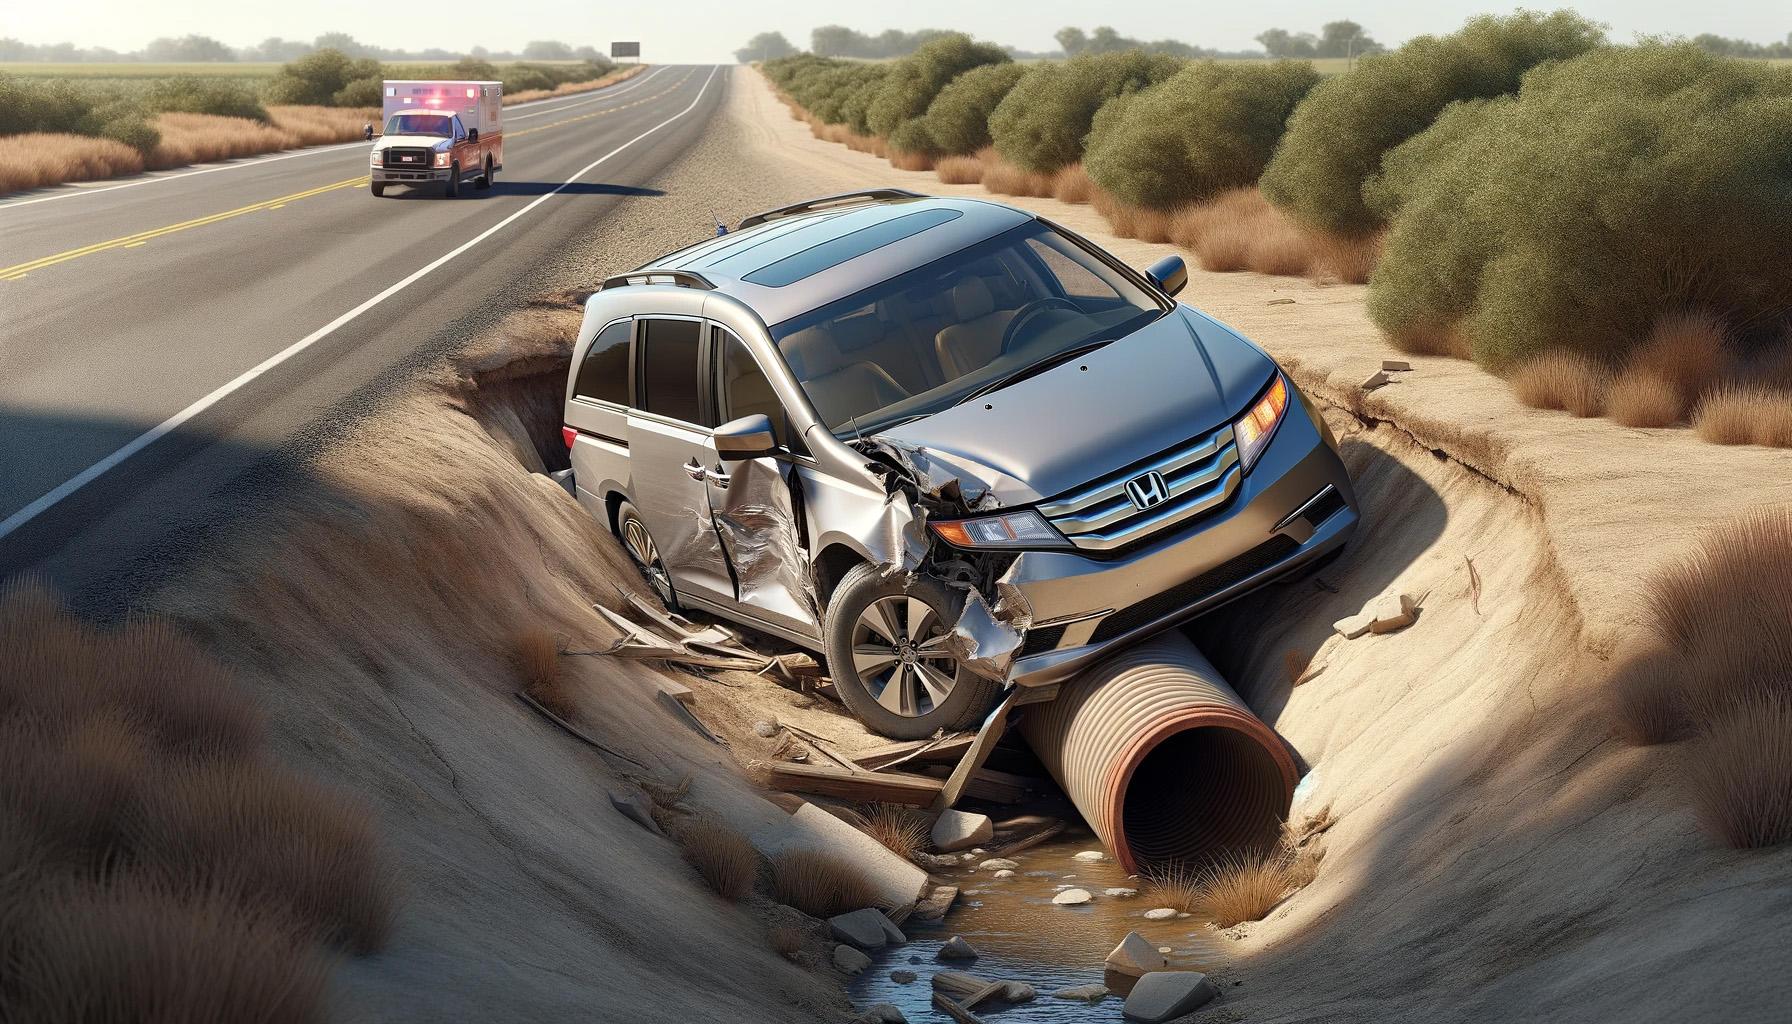 2009 Honda Odyssey crashes and strikes culvert or accident news graphic